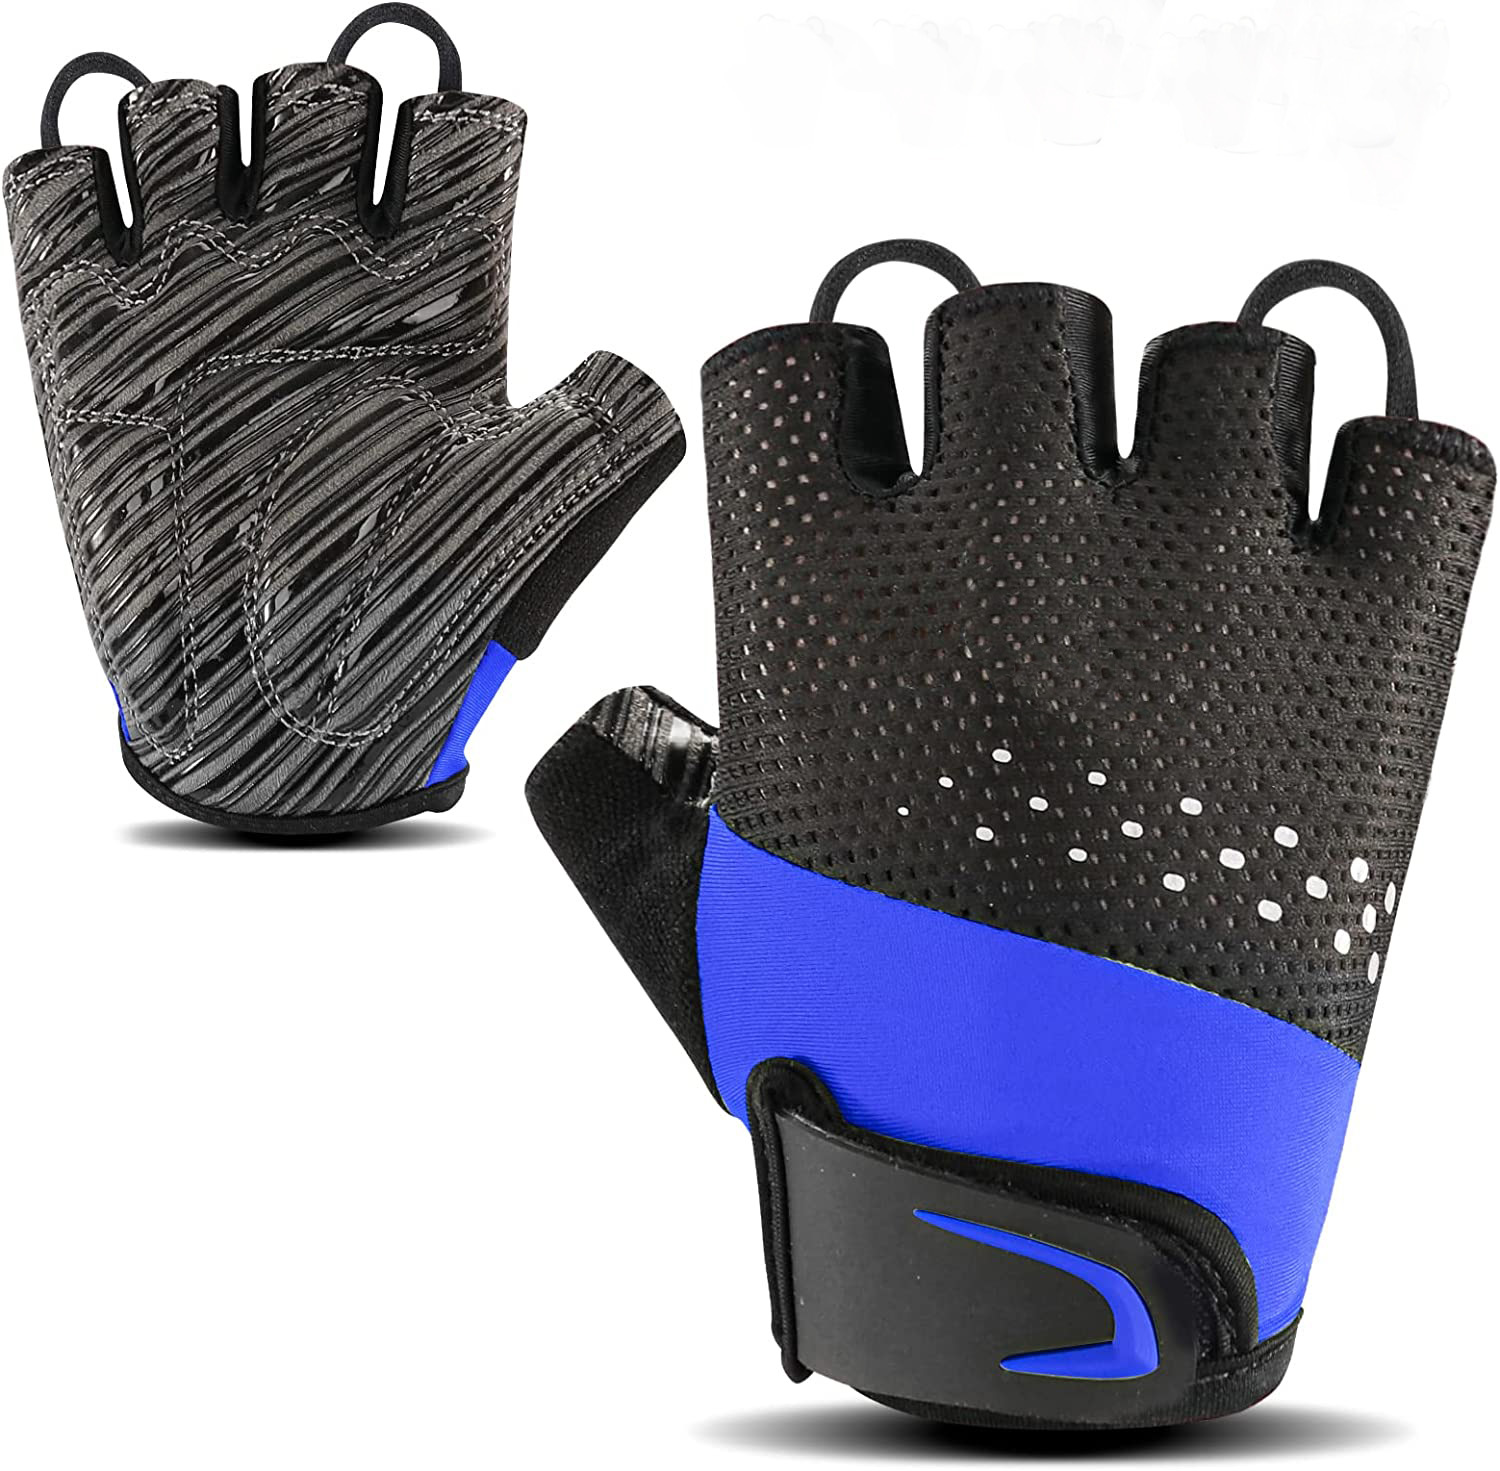 Customized Breathable Light Weight Summer Half Fingers Comfortable Outdoor MTB Cycling Racing Sports